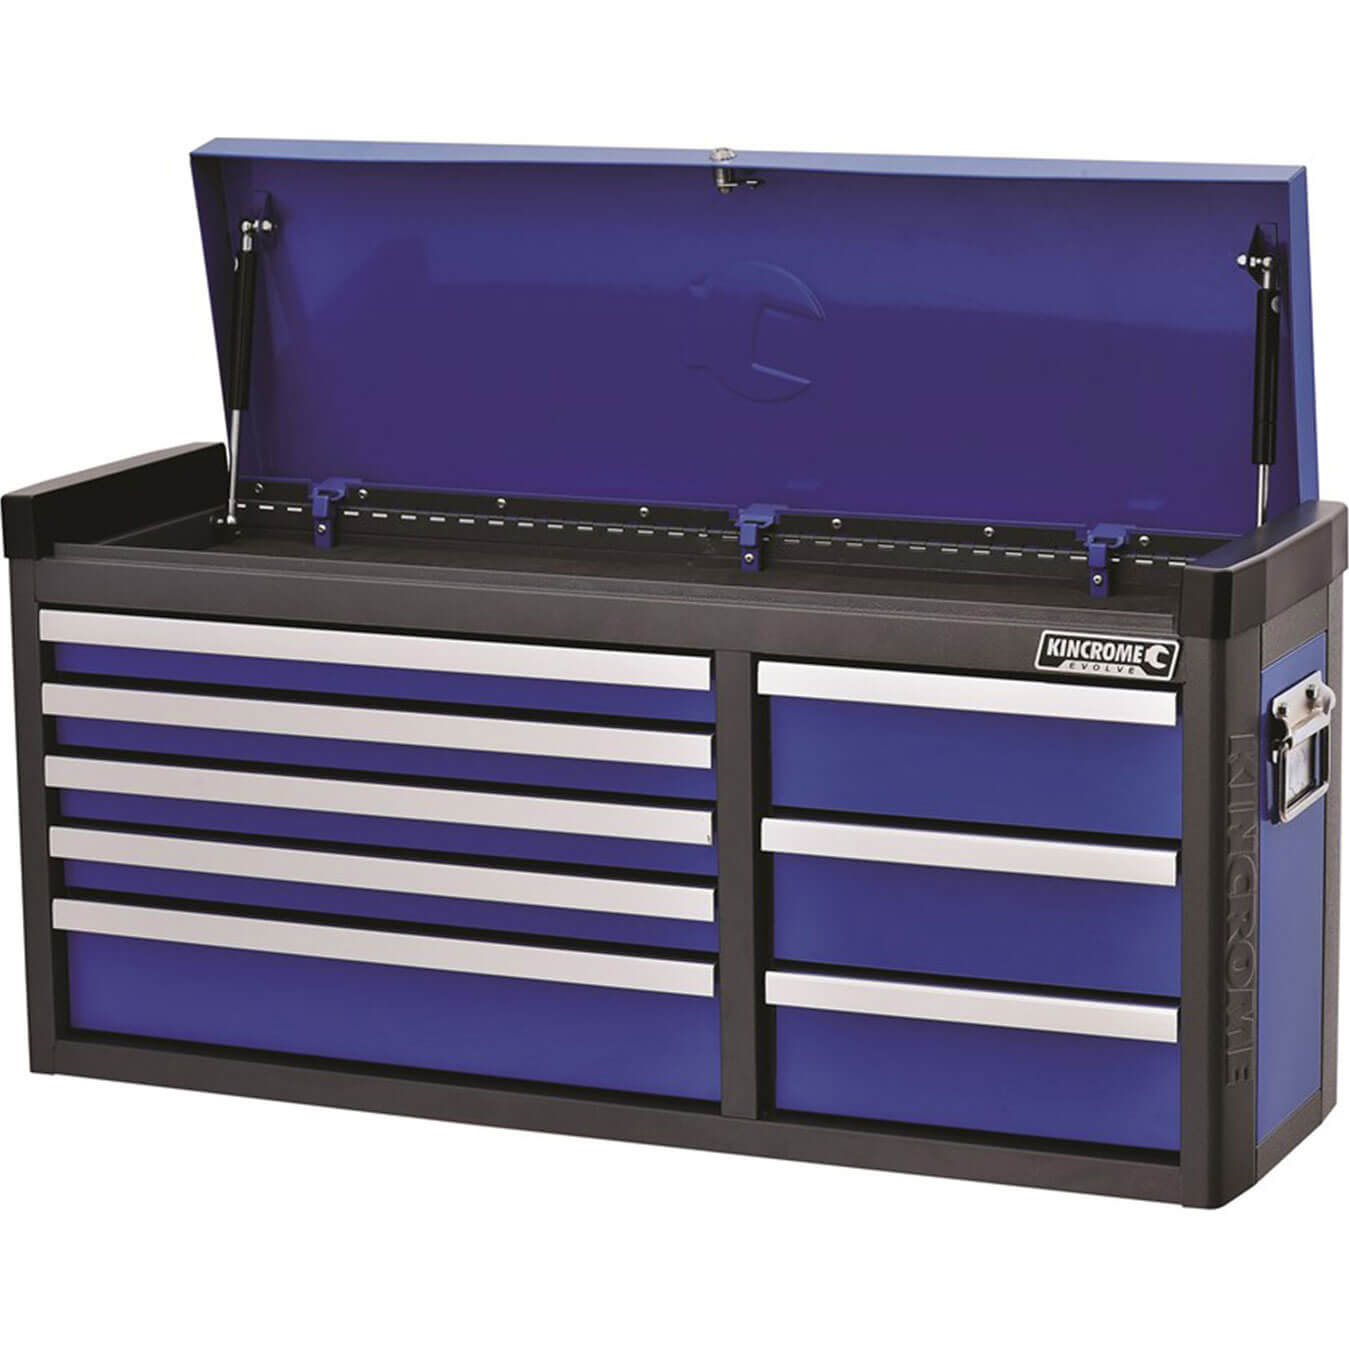 Image of Kincrome Evolve 8 Drawer XL Tool Chest Blue